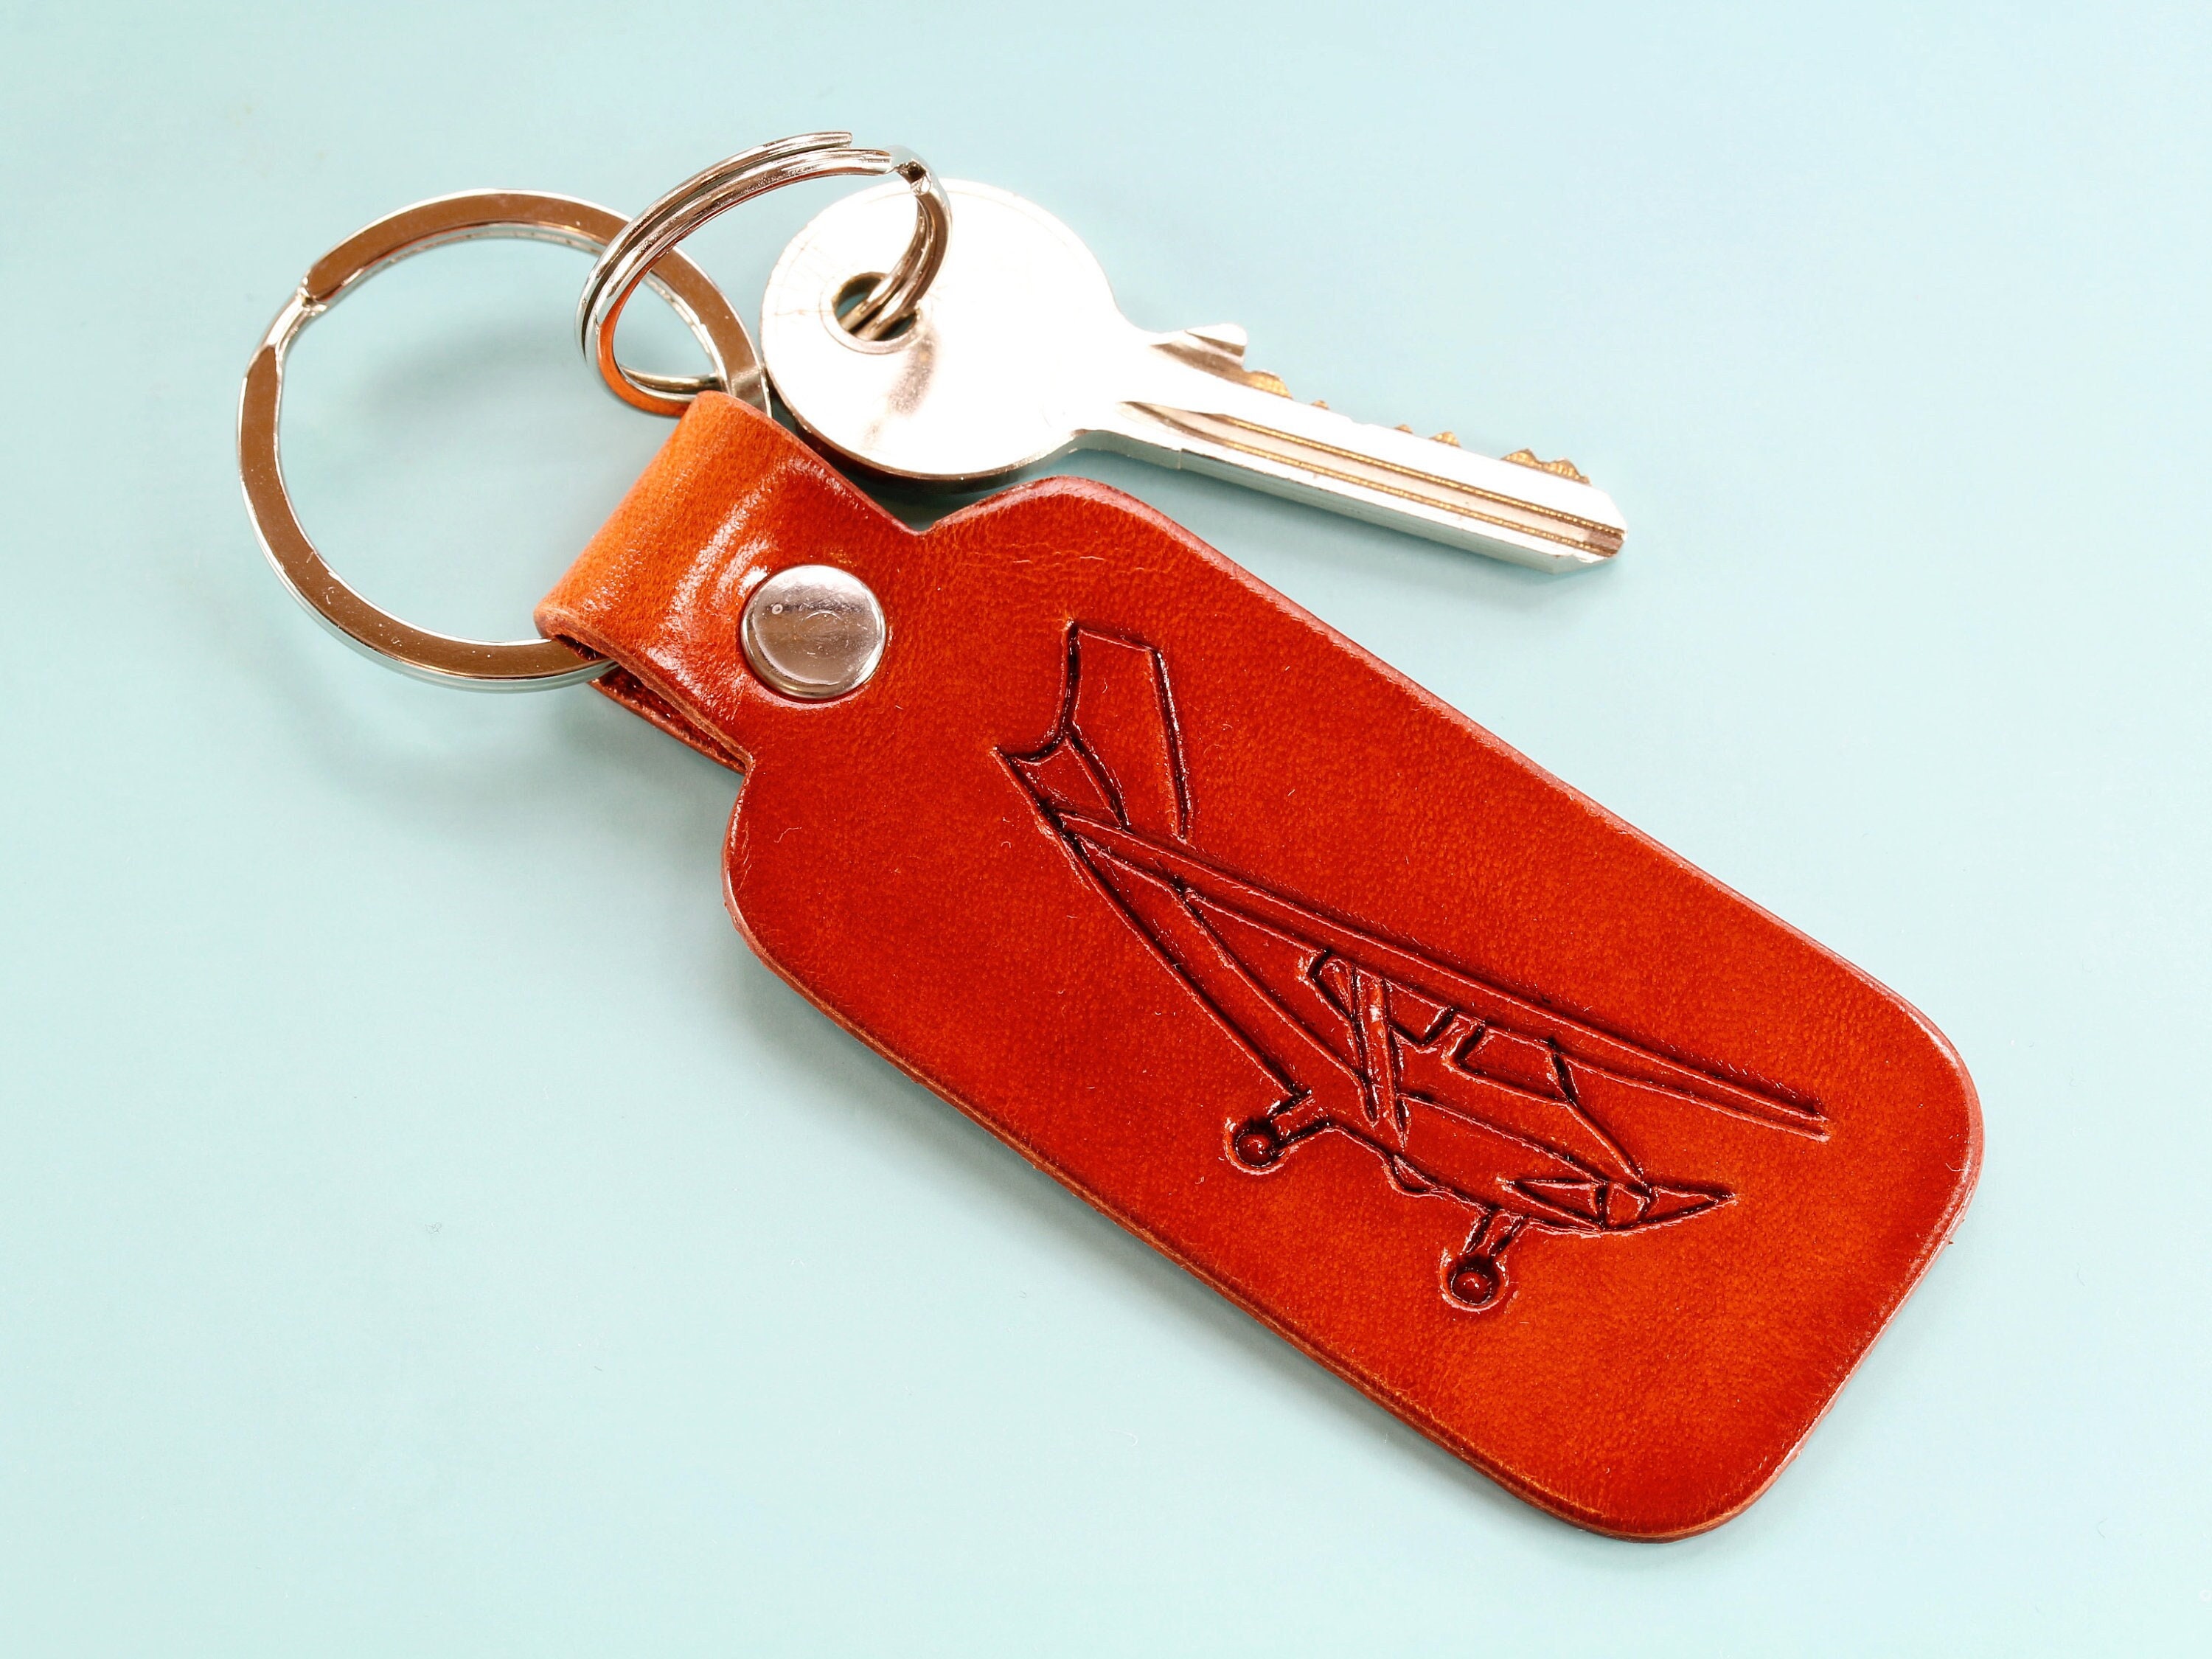 Metal Field Shop Leather Keychain Head,Key Fob Keychain Cover Holder,Leather Hardwares Gold / 50pcs